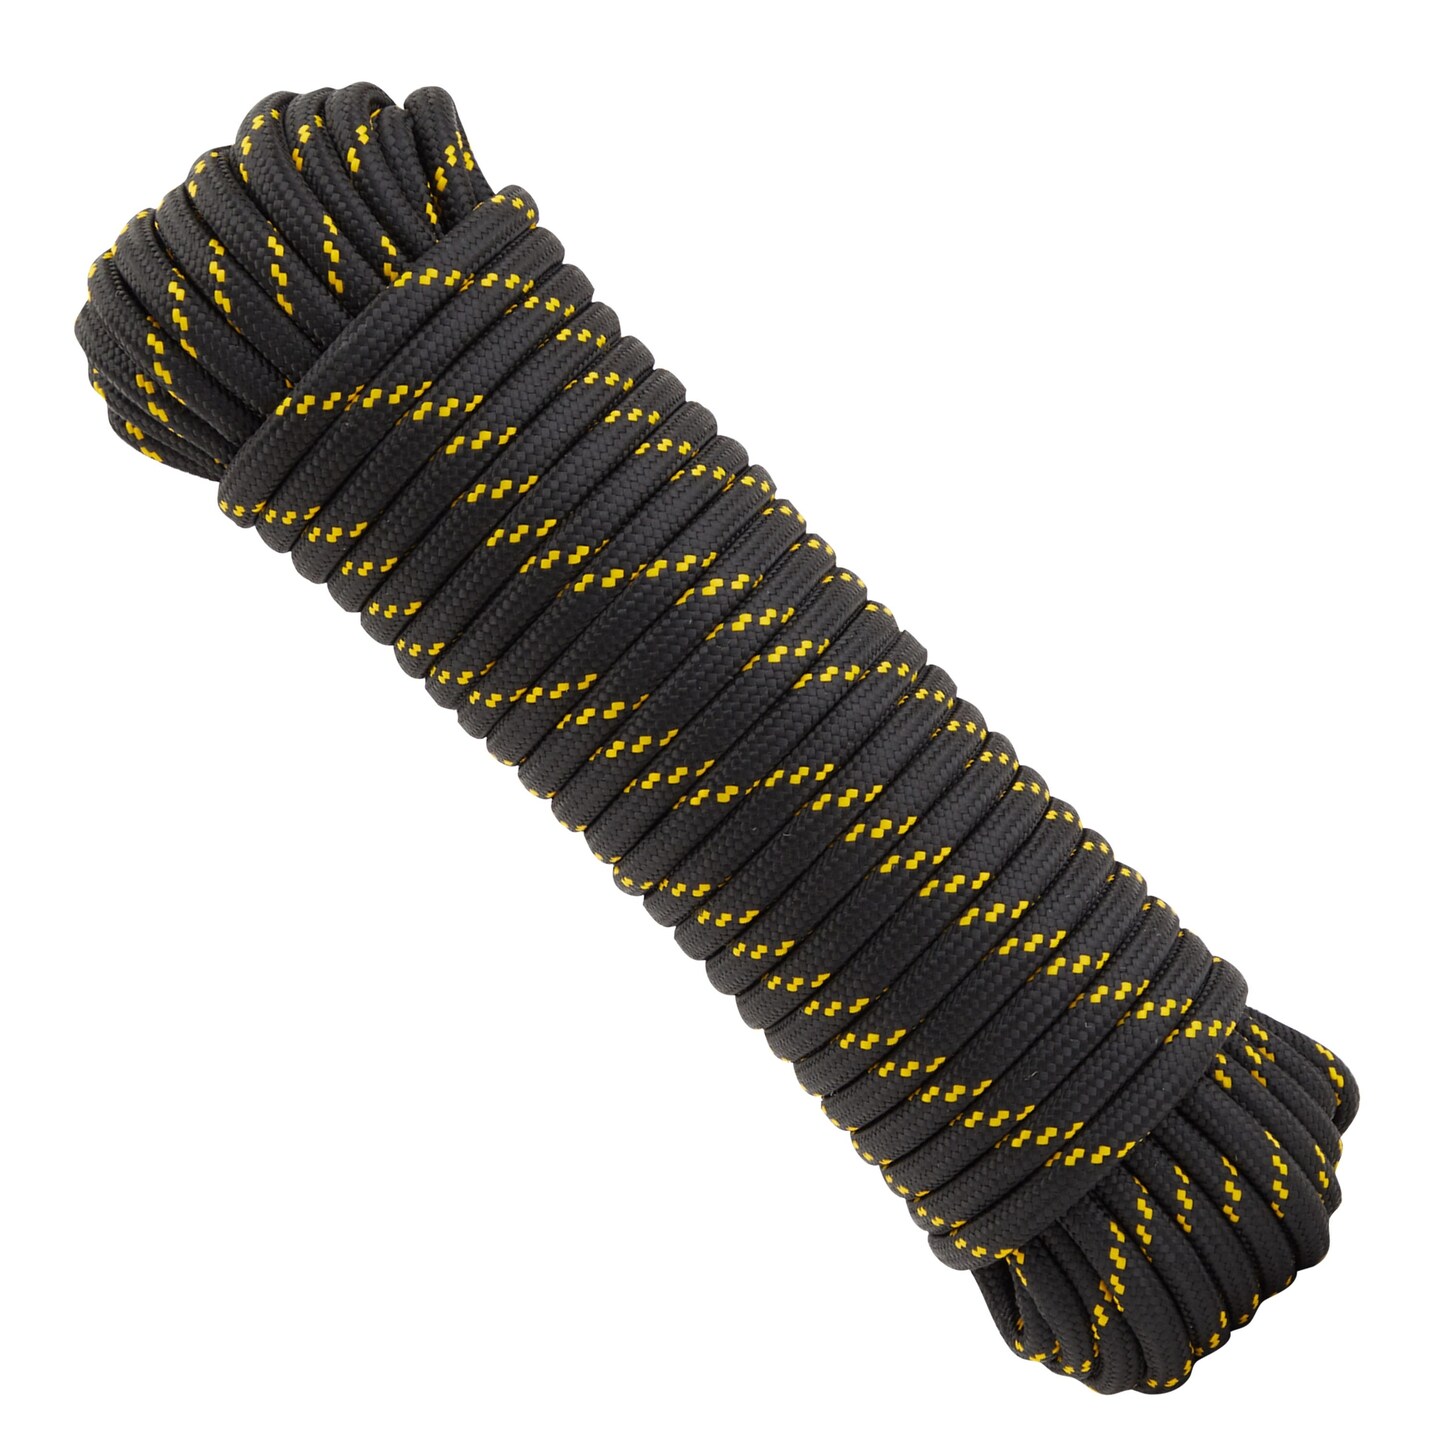 1/2 Inch Braided Polypropylene Rope, 100 Ft Tie Down Utility Cord for  Knots, Camping, Trailers, Awnings, Survival Skills, Boat Docks, Marine  Mooring (Black/Yellow)